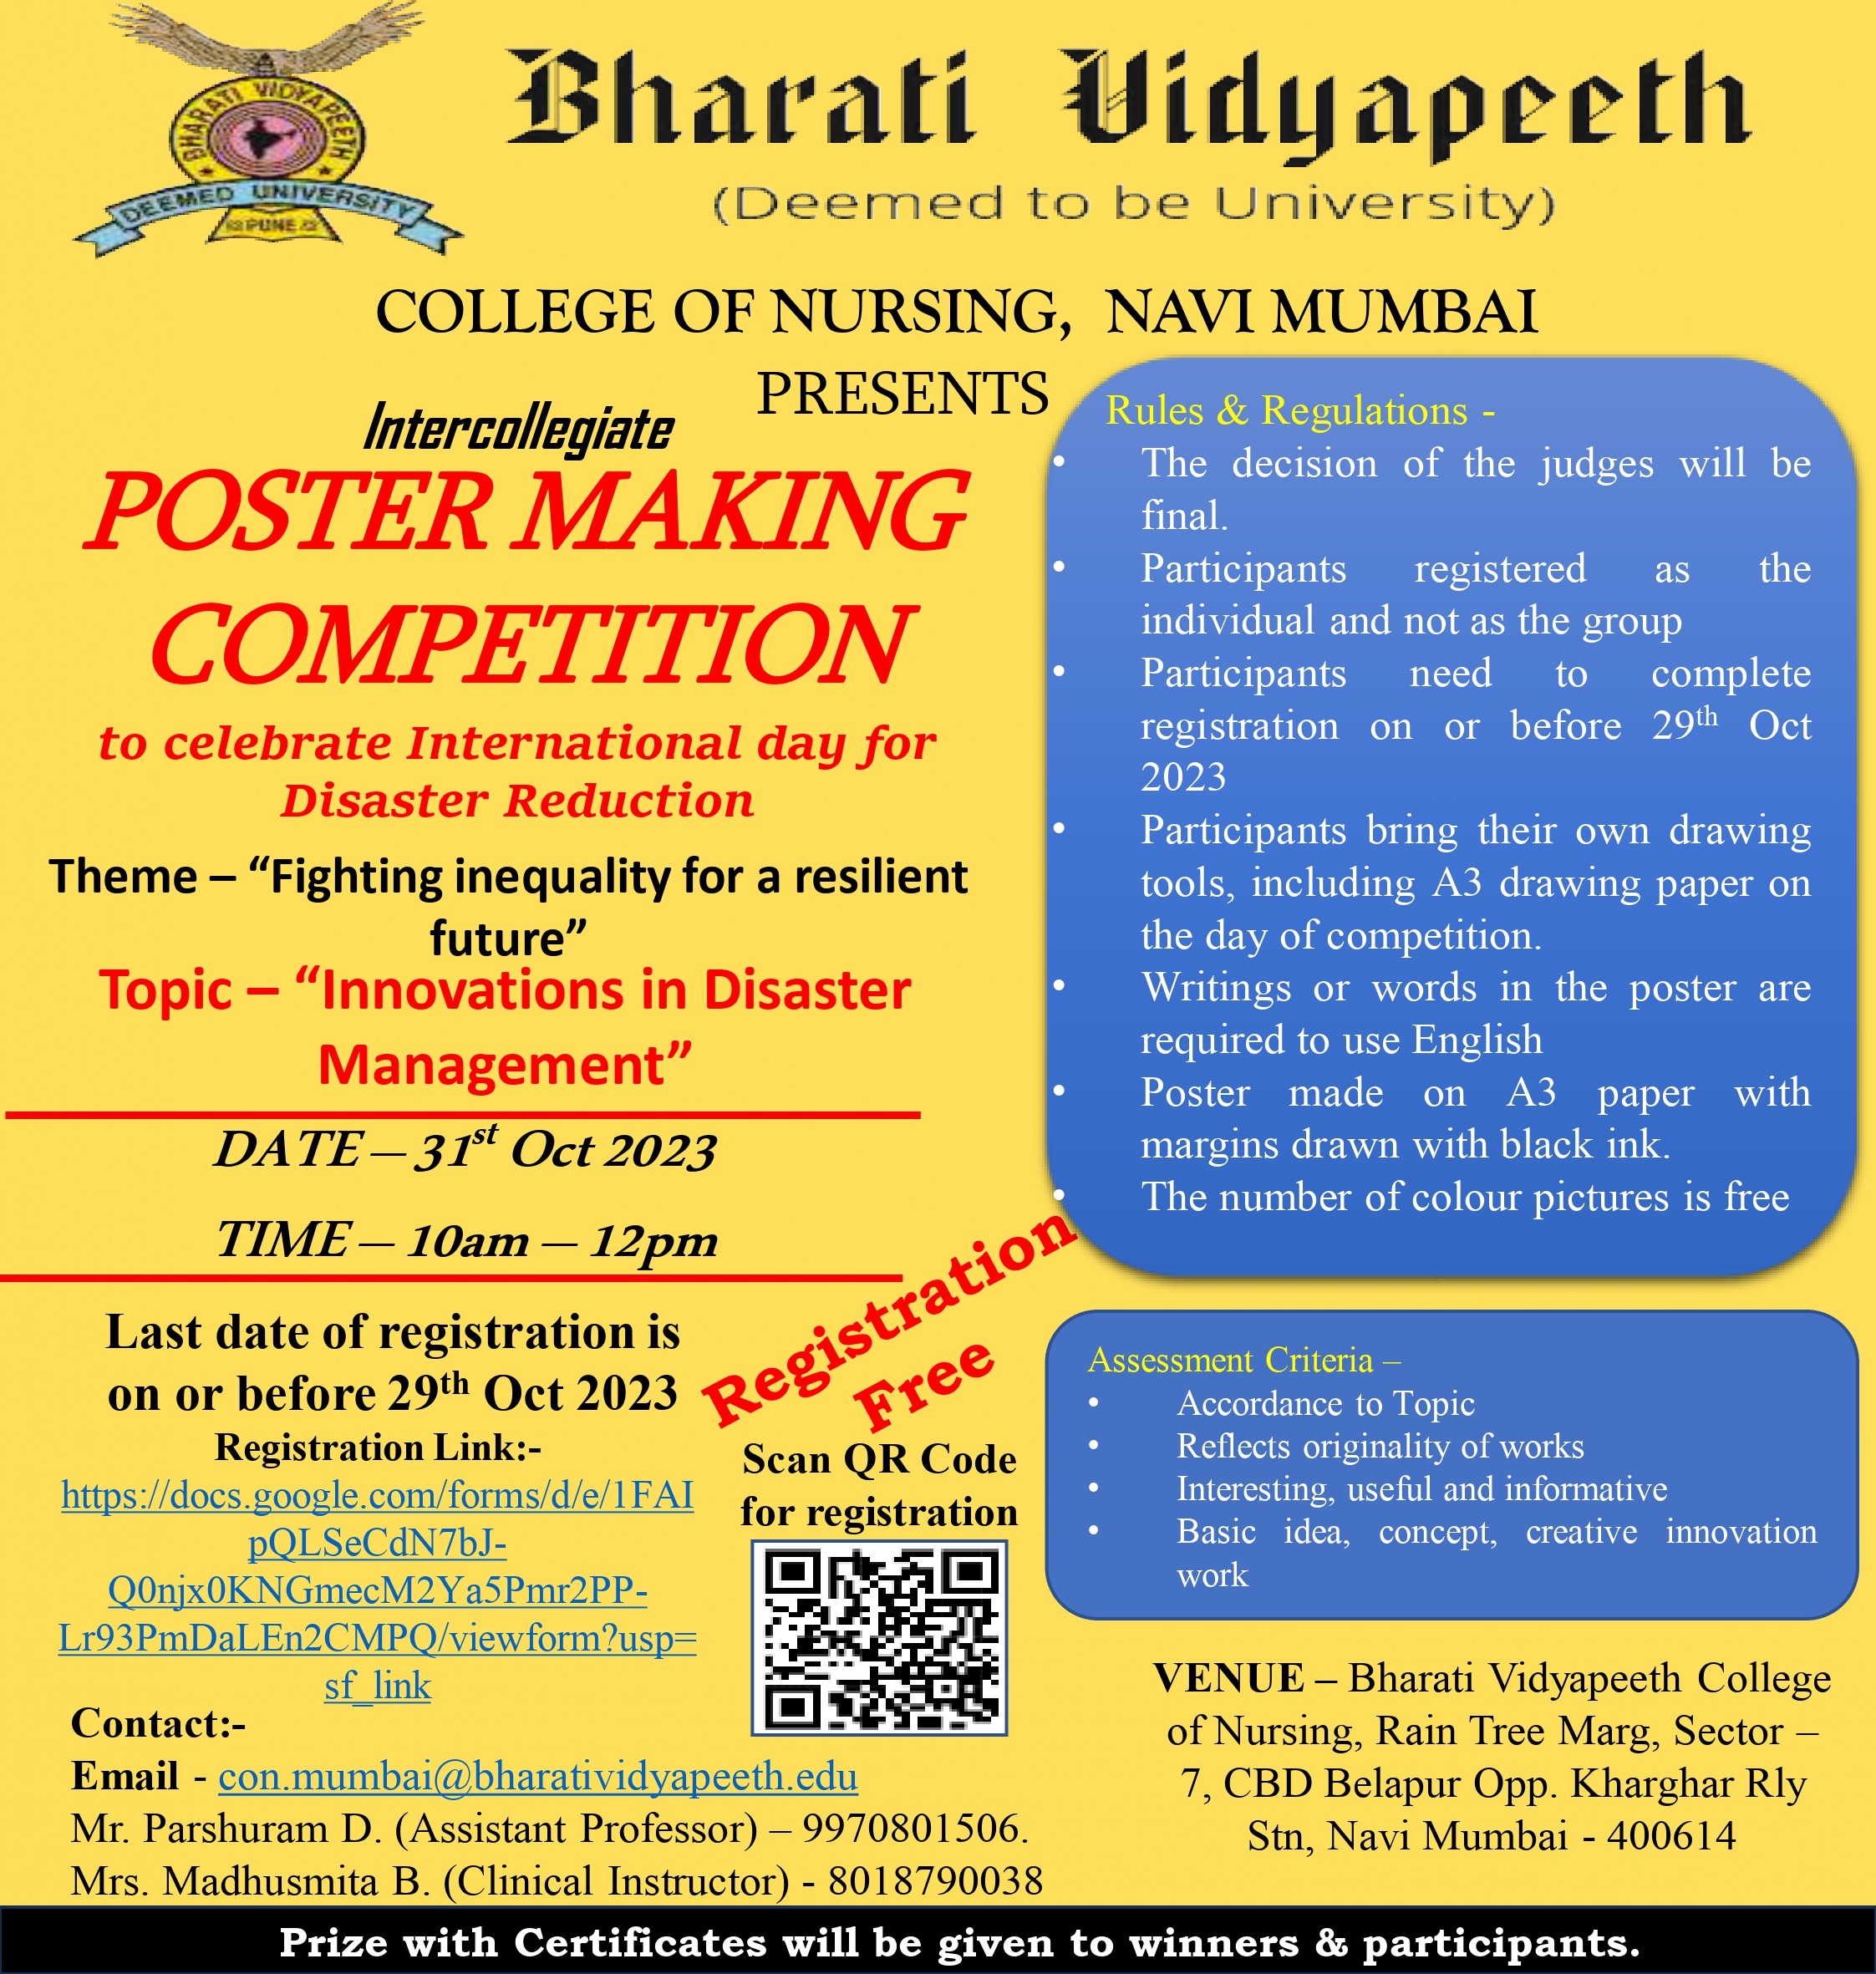 "Intercollegiate Poster Making Competition to celebrate International Day for Disaster Reduction 2023:“Theme - "Fighting inequality for resilient future" on 31st October 2023"